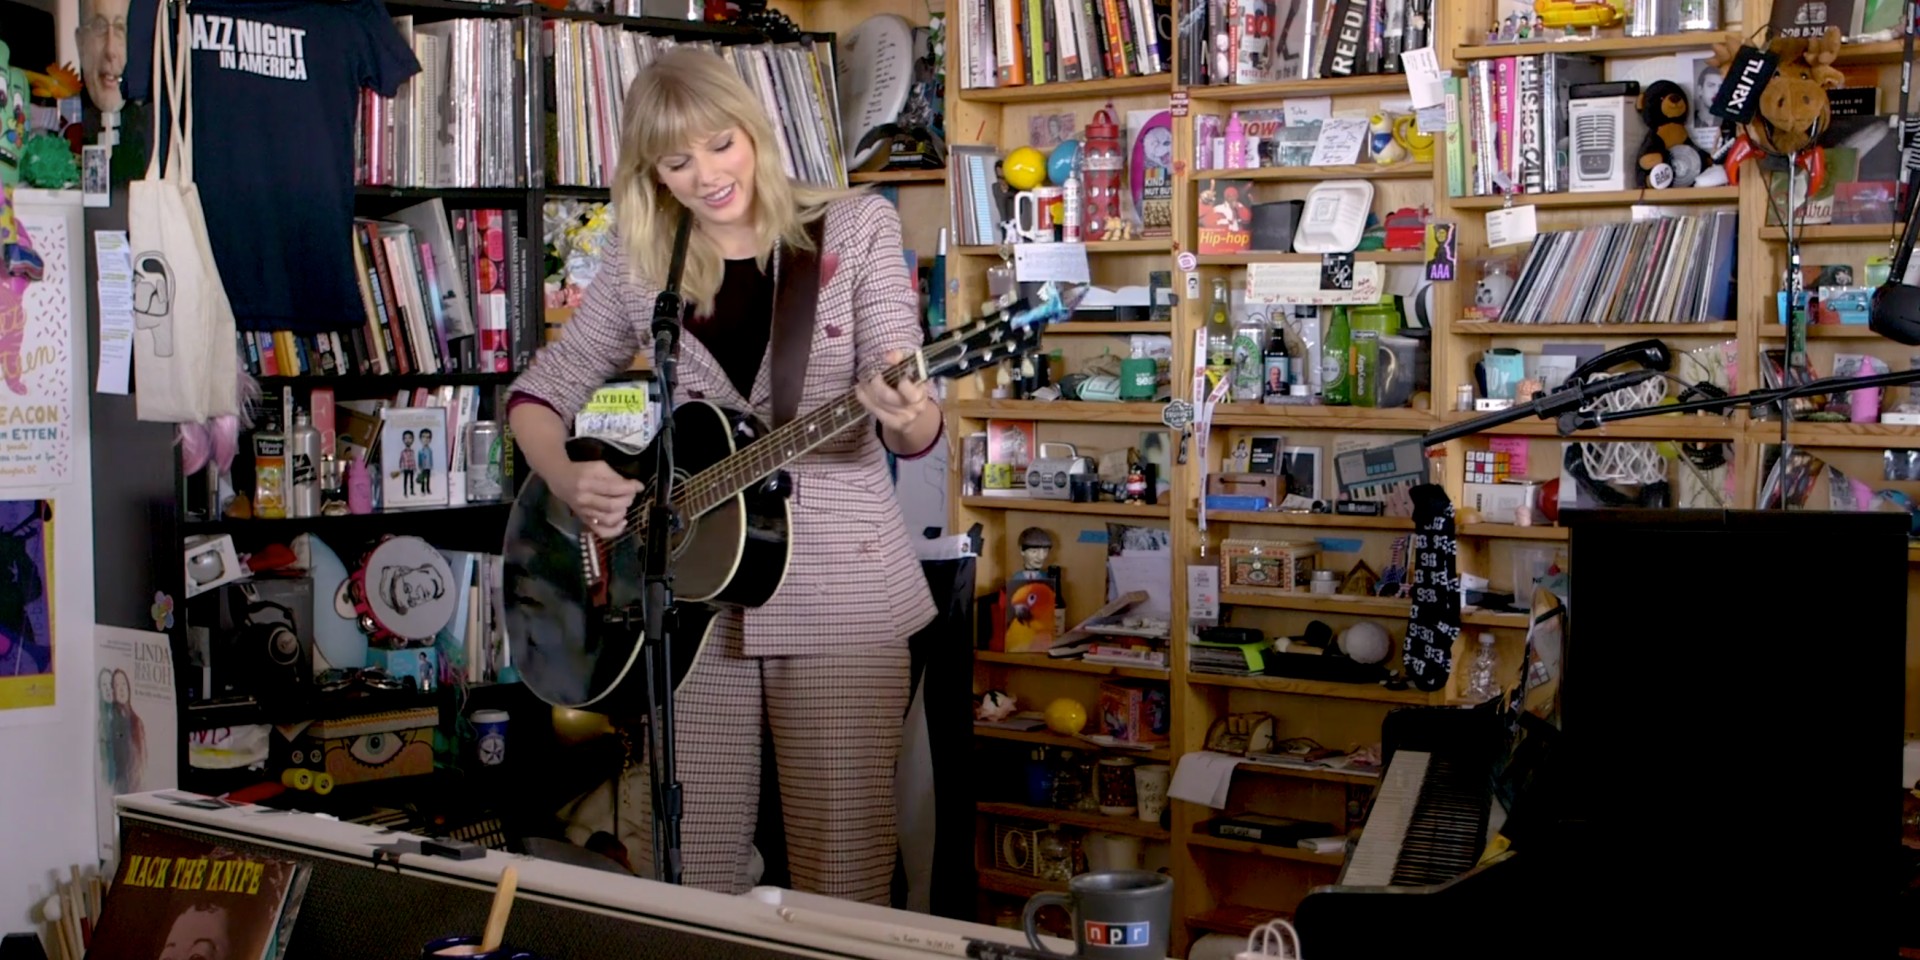 Taylor Swift showcases an intimate acoustic set on Tiny Desk